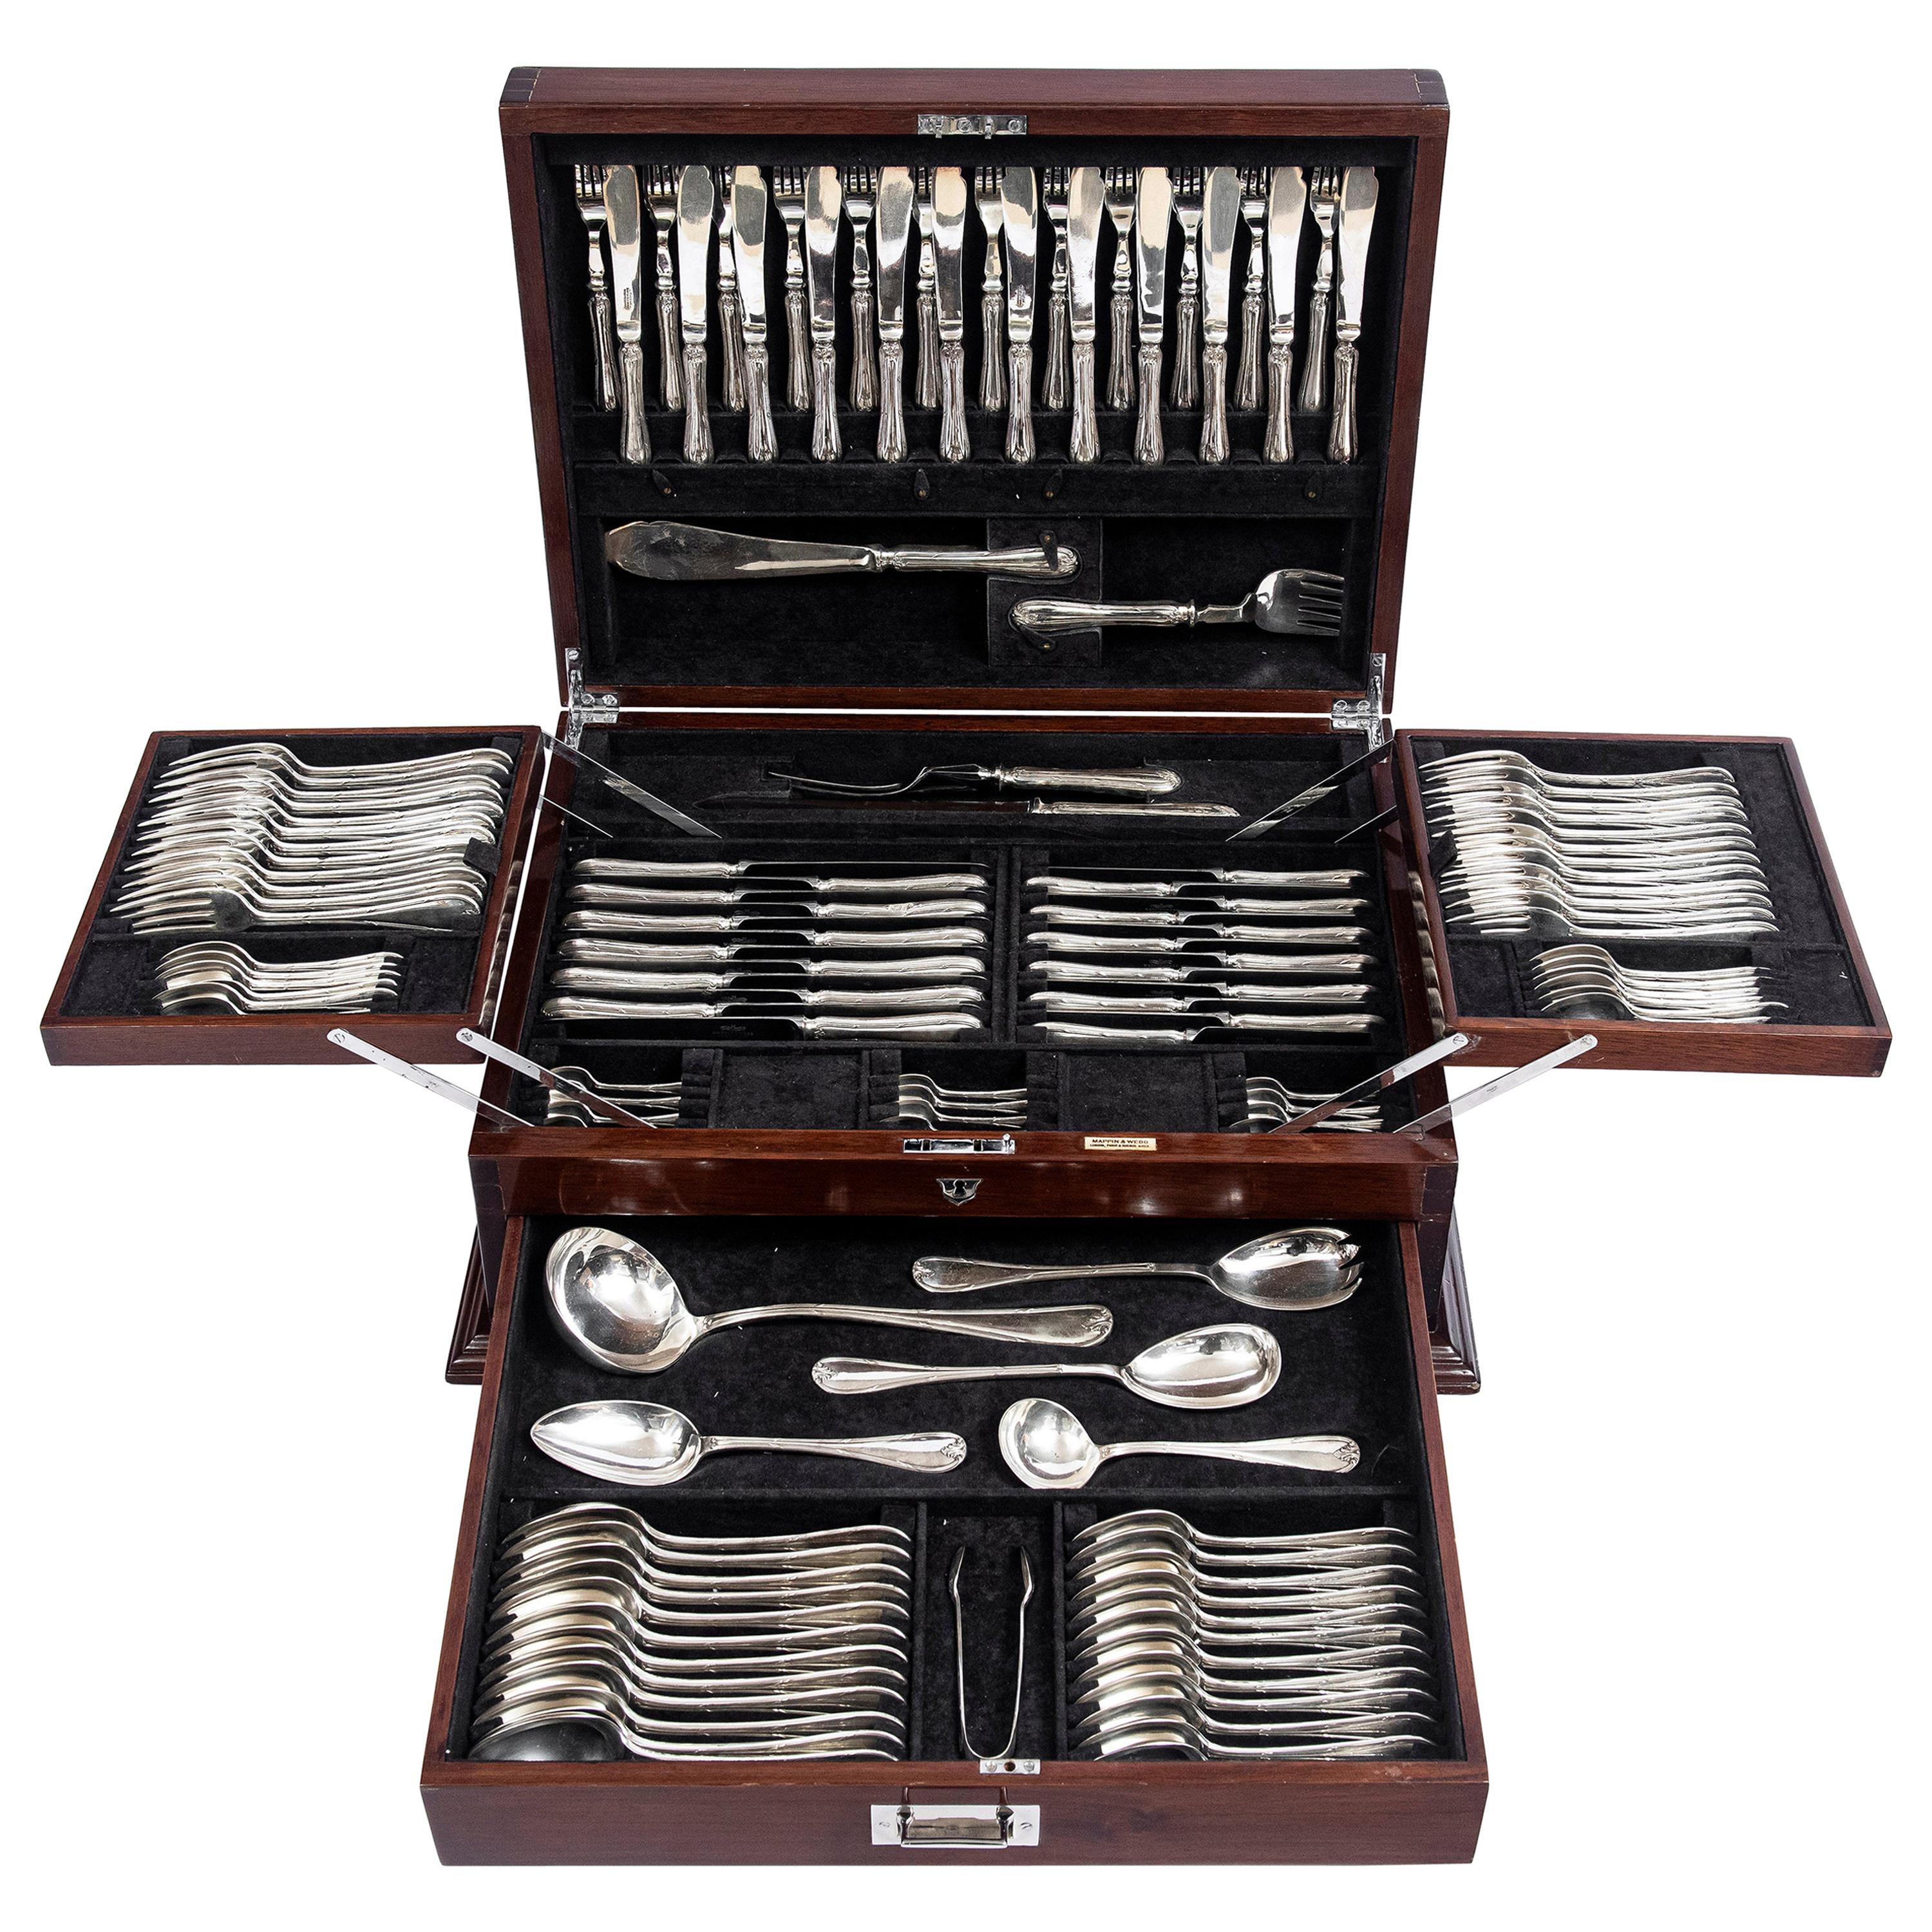 Mappin & Webb Cutlery Set for 12 People. England, Early 20th Century